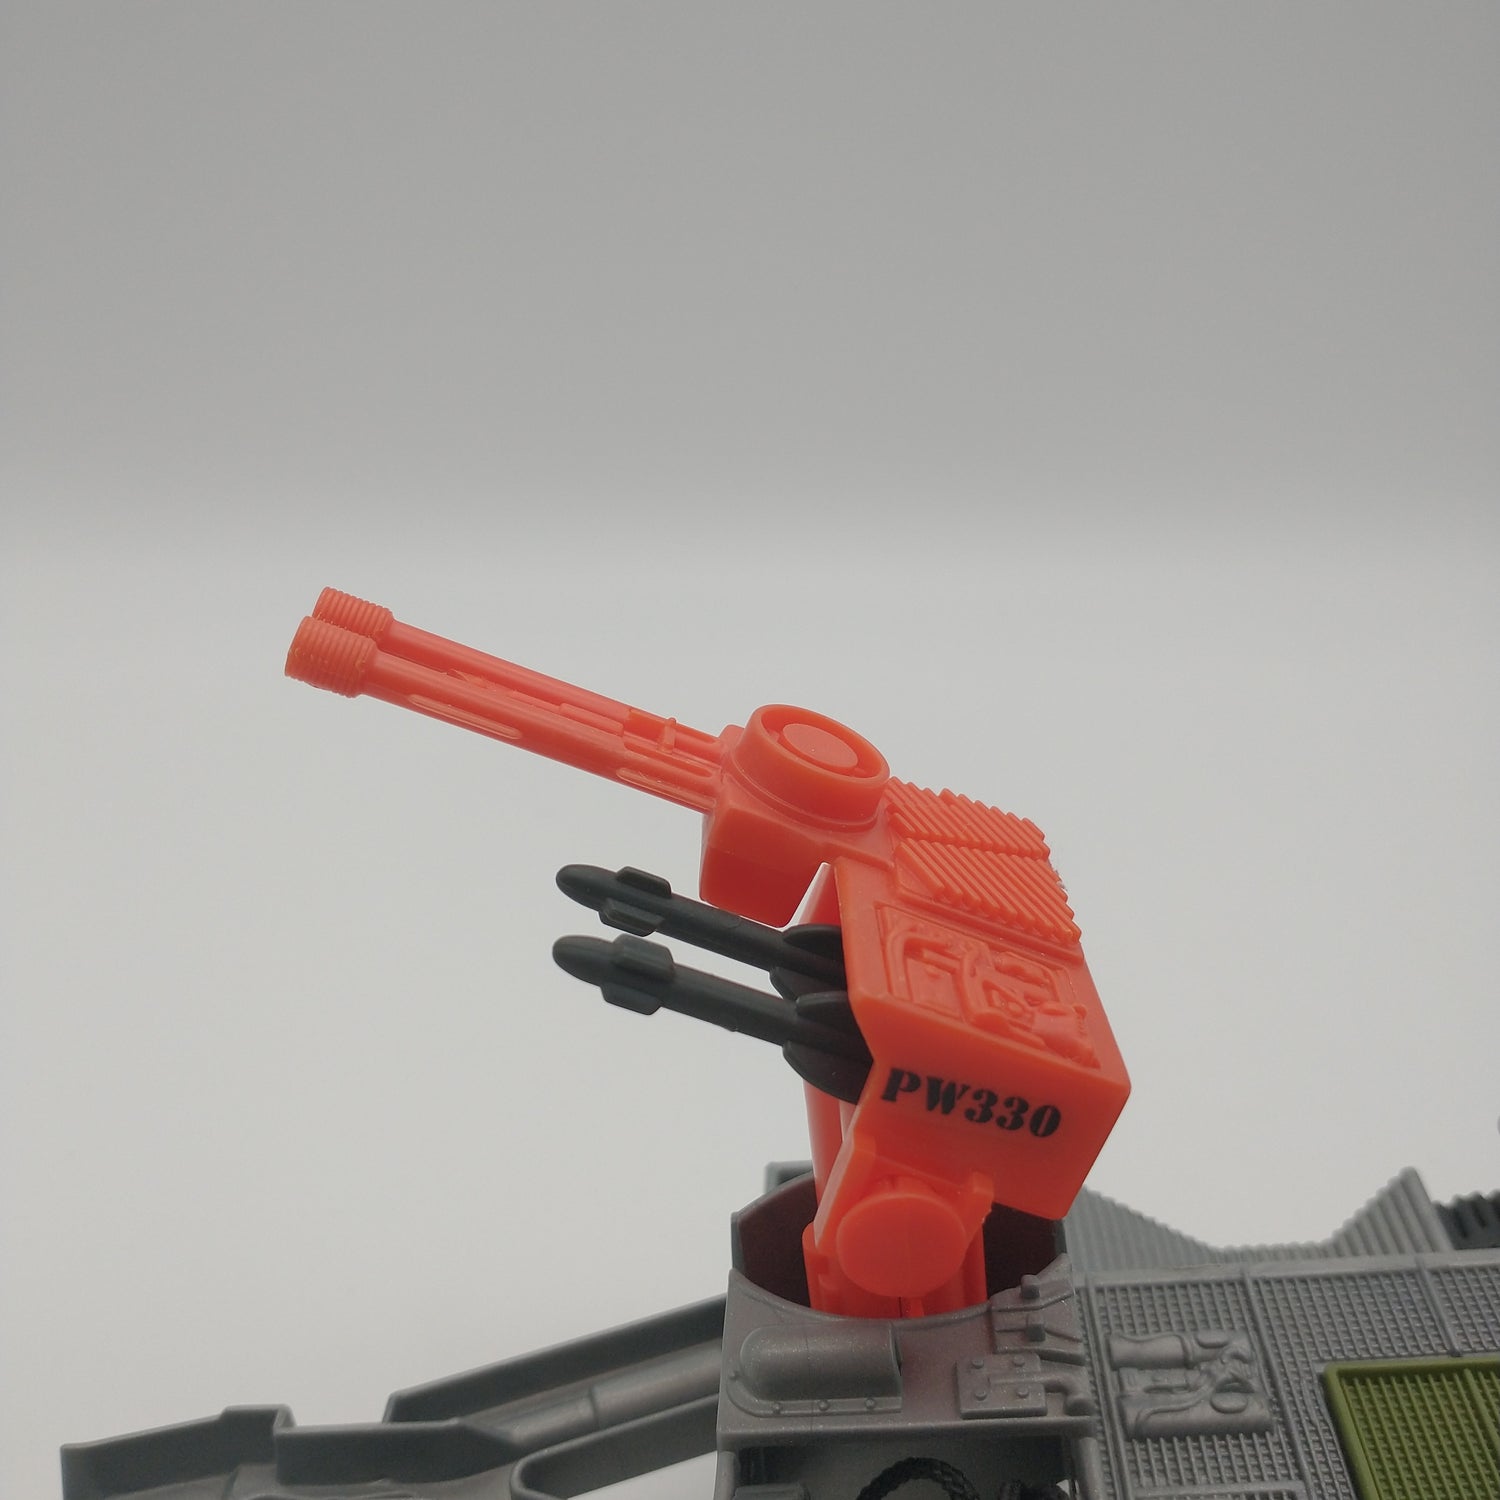 An orange missile launcher mounted on top of the vehicle